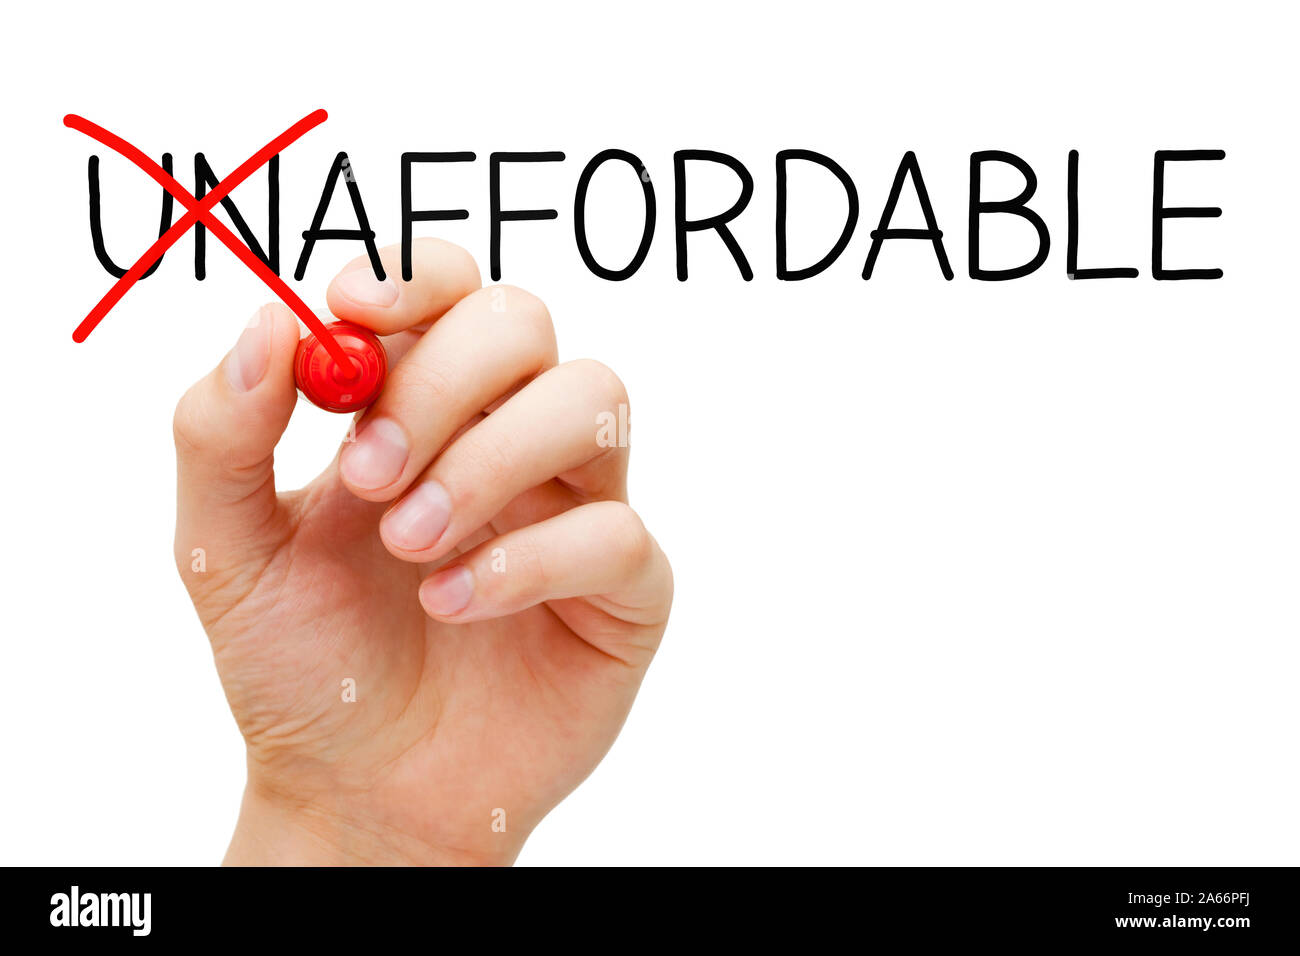 Hand writing a concept changing the word Unaffordable into Affordable with red marker isolated on white background. Stock Photo